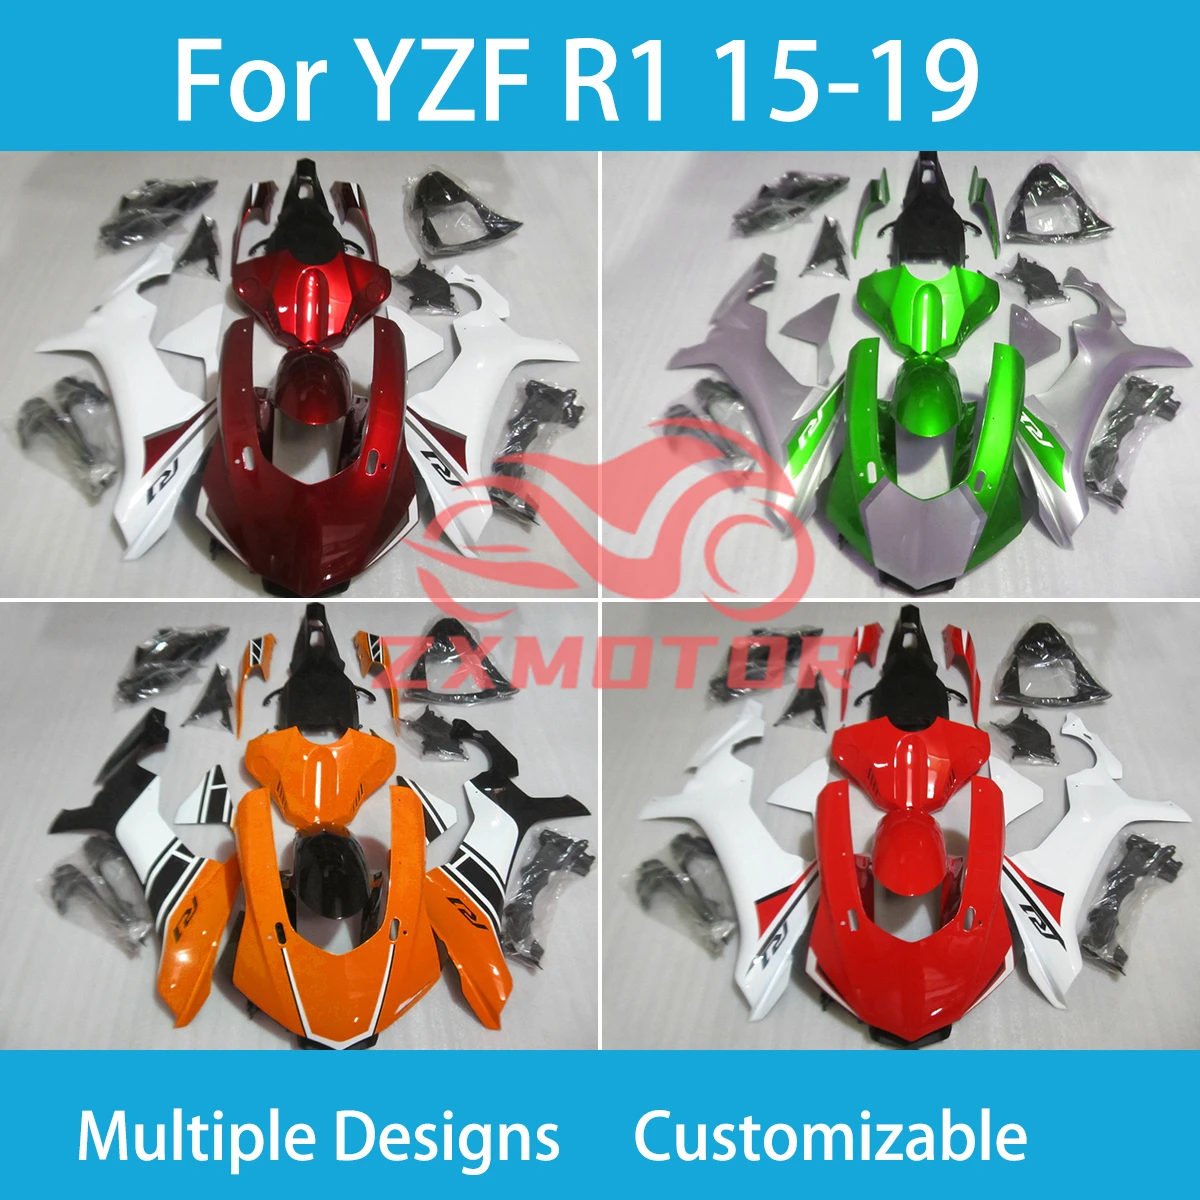 

For YAMAHA YZFR1 2015 2016 2017 2018 2019 Fairings Motorcycle YZF R1 15 16 17 18 19 Fairing Kit ABS Injection Molding